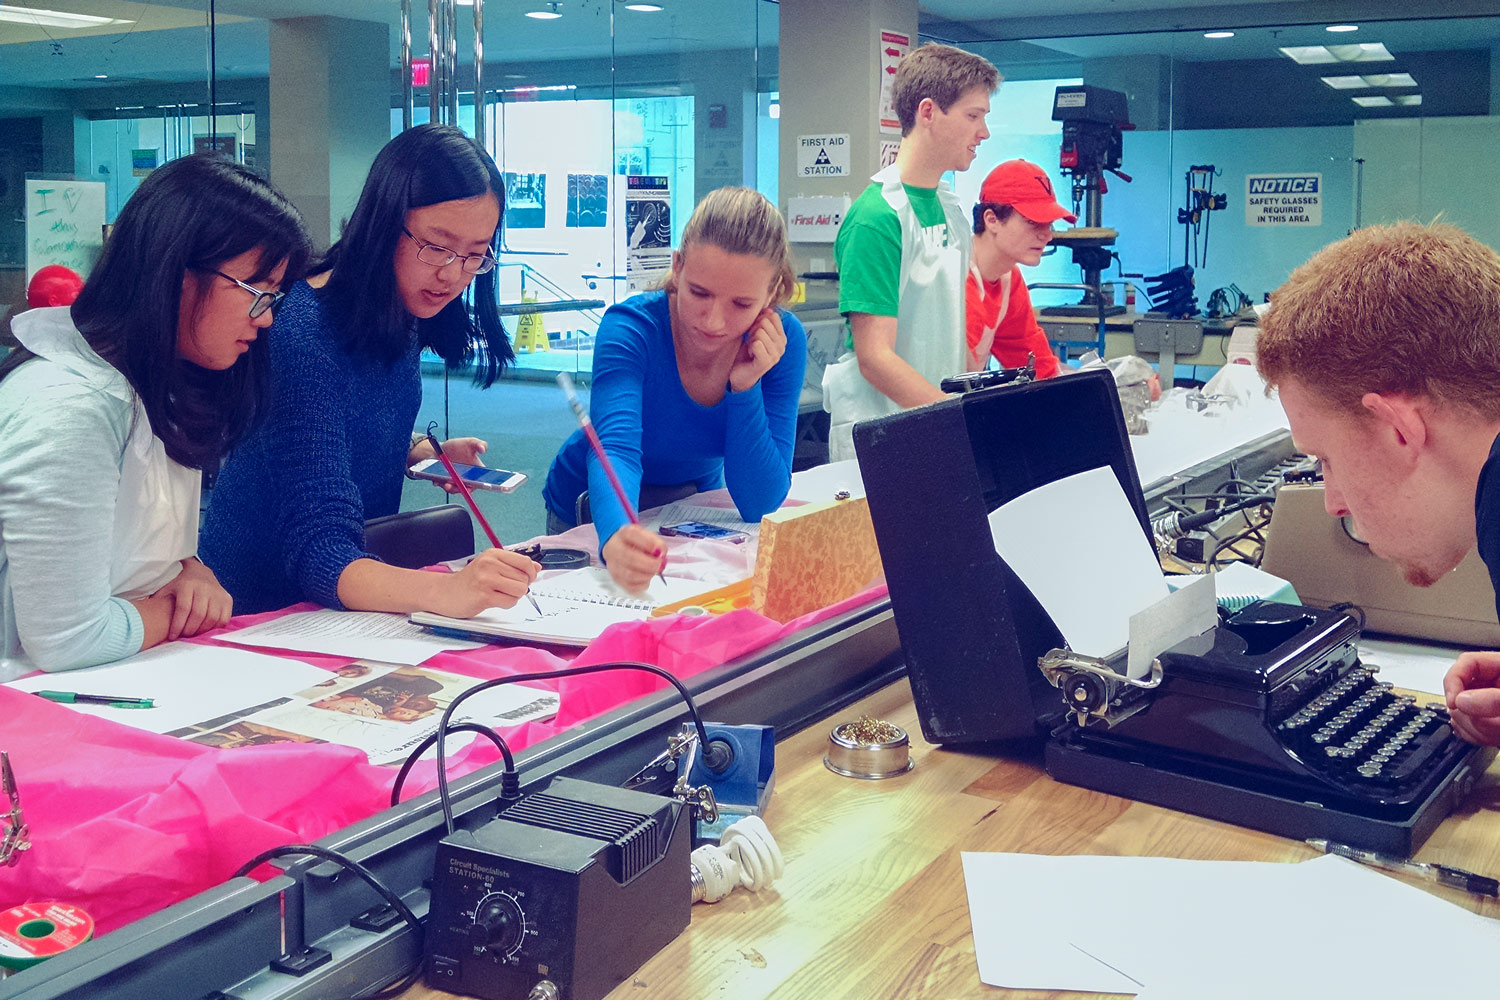 Left to right, Tuyet-Minh Tran, Emily Lin, Ashley Ewing, Paul Qualey and J. Stillman Hanson try out homemade ink and clay tablets, while Myles McPartland checks out a manual typewriter.